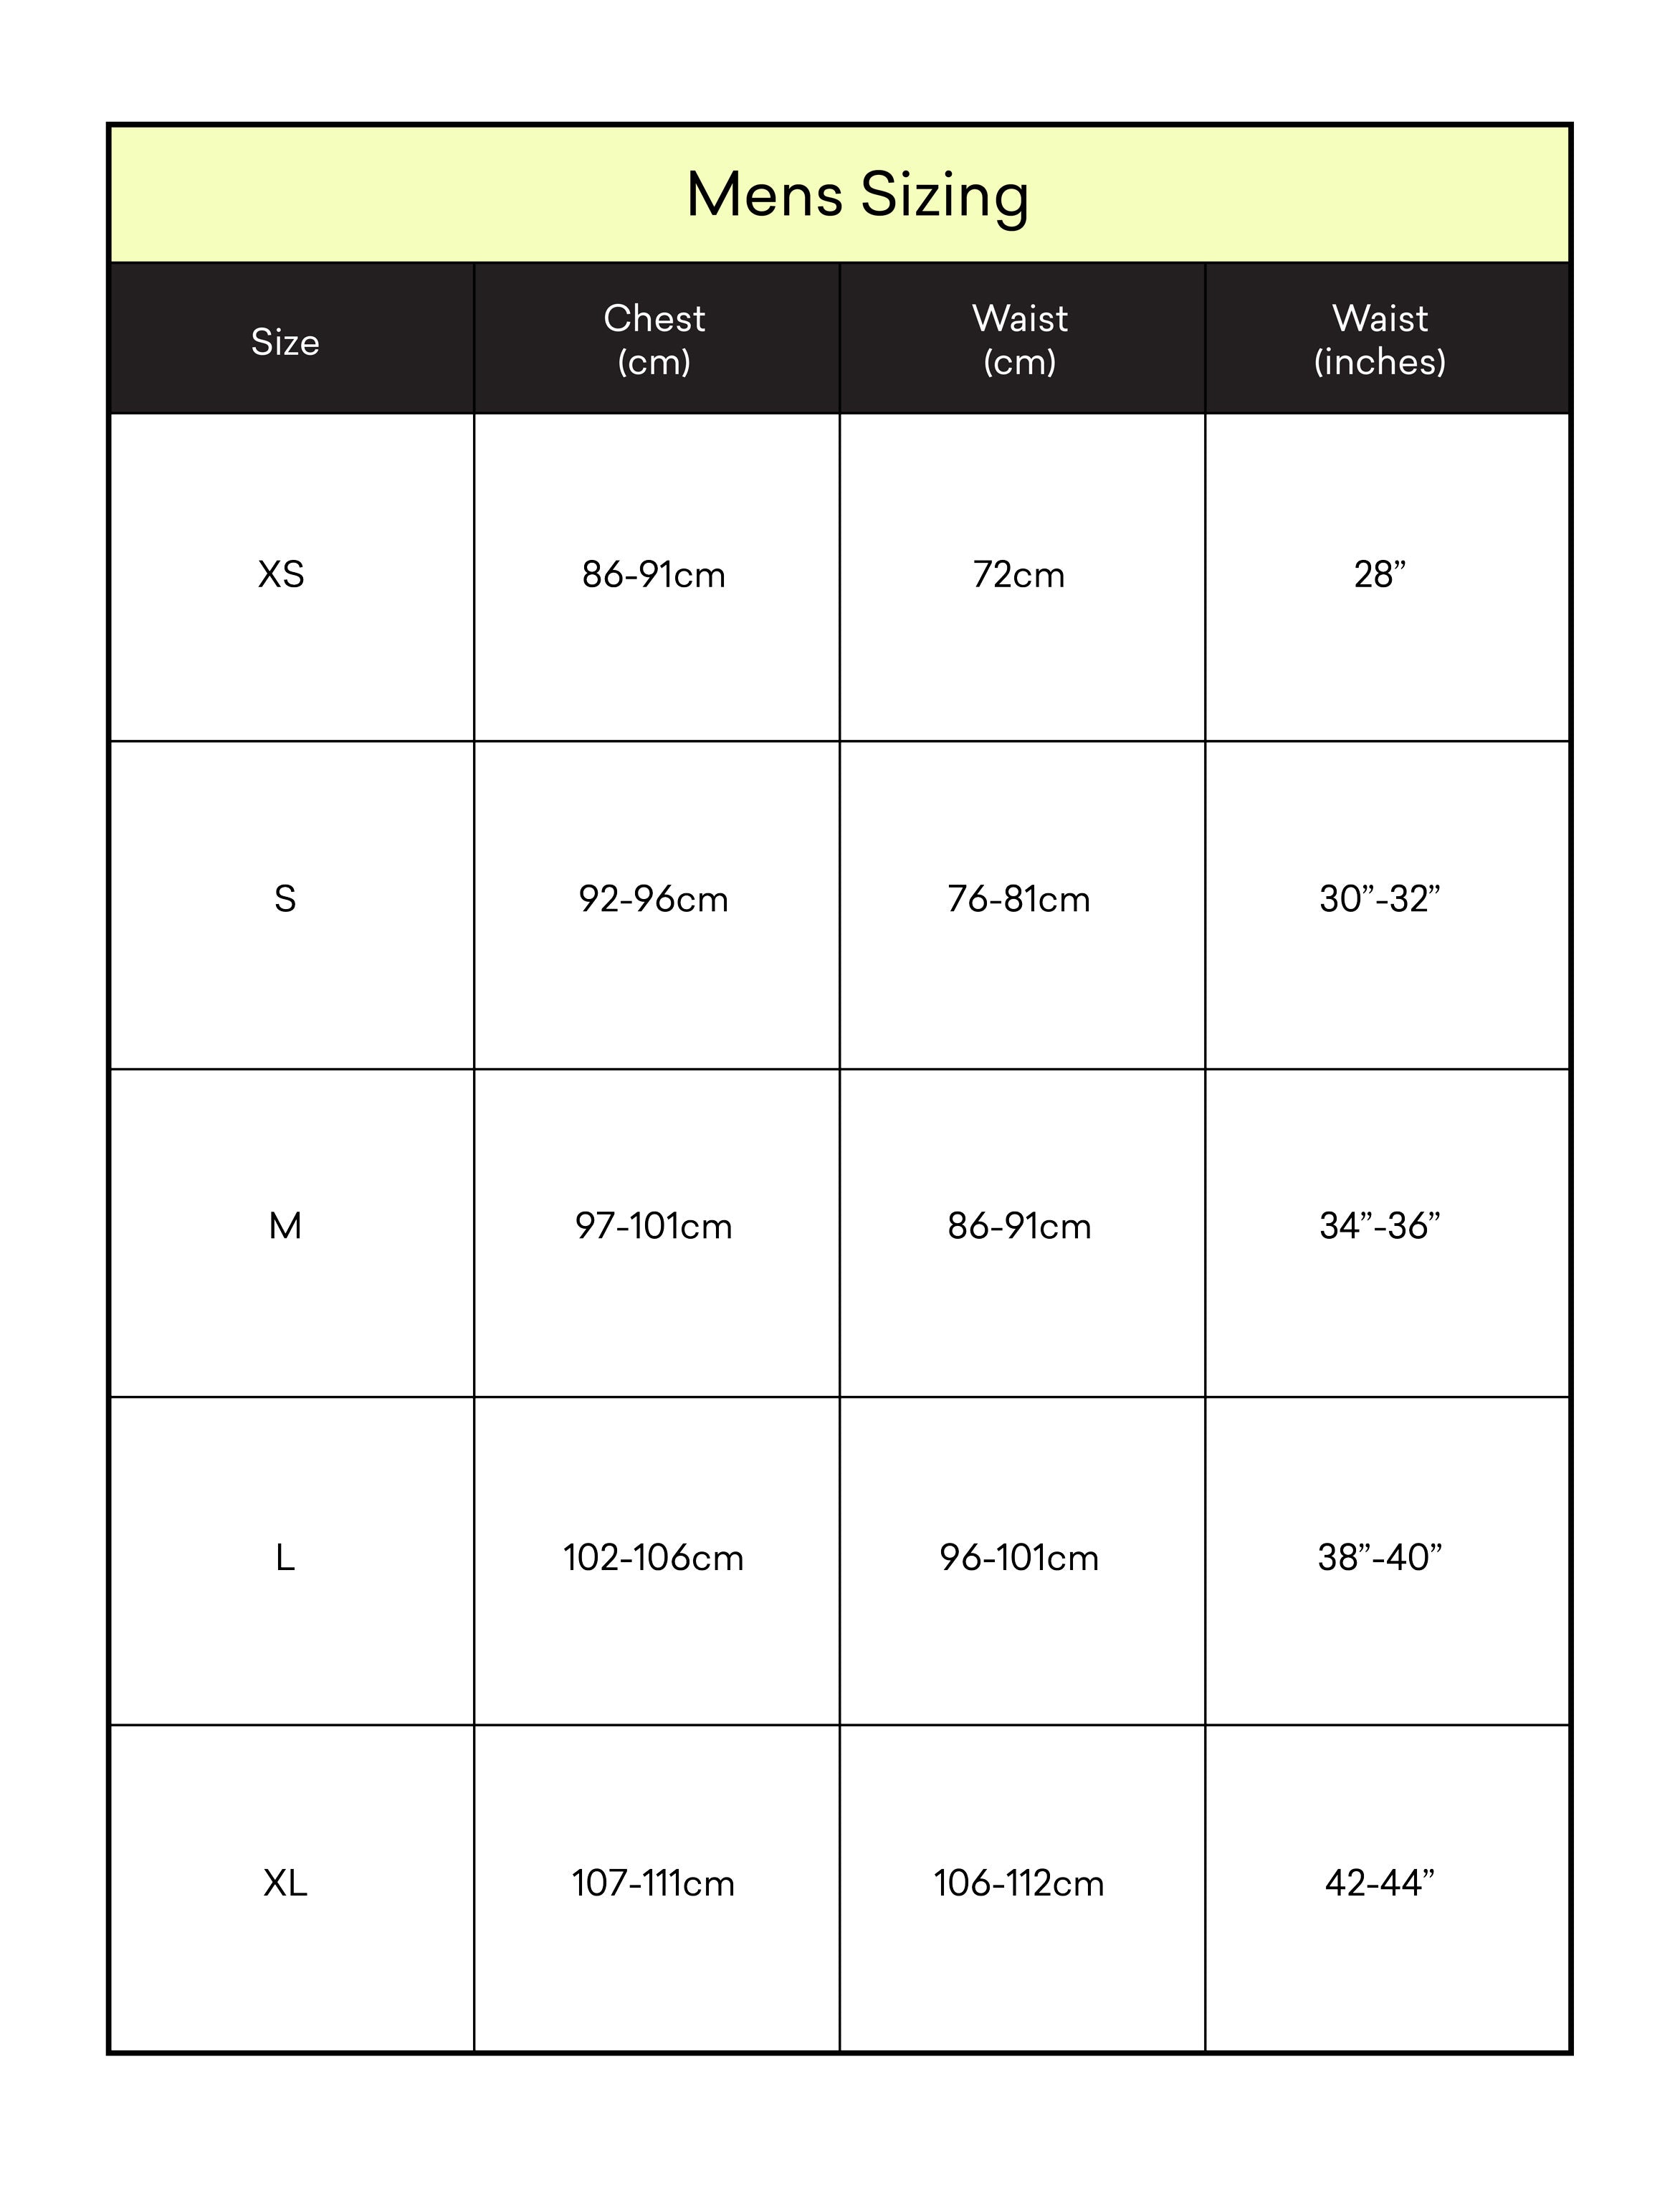 One Essentials Mens Sizing chart